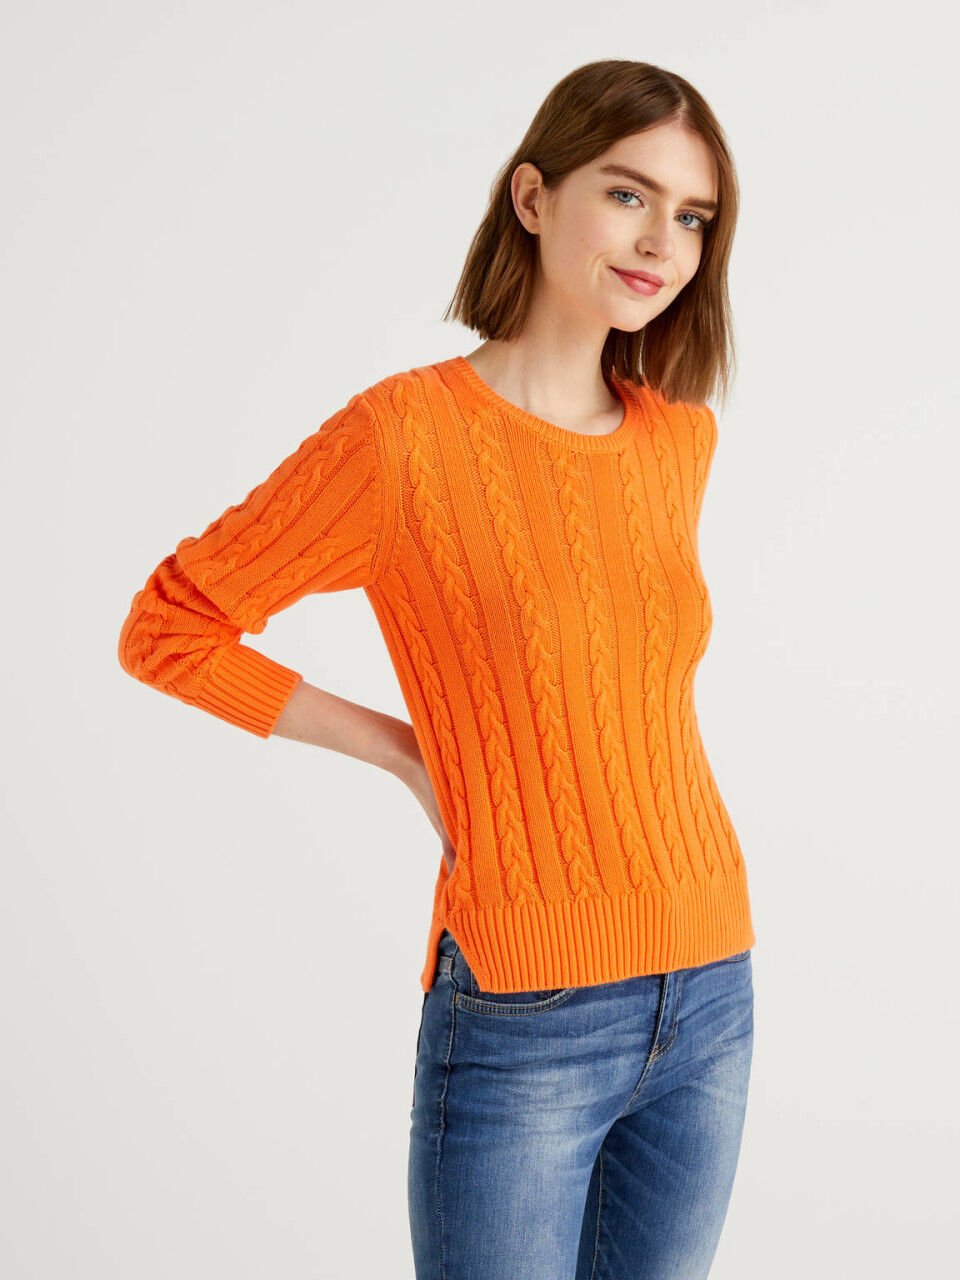 Women's Sweaters and Jumpers Sale Collection 2021 | Benetton